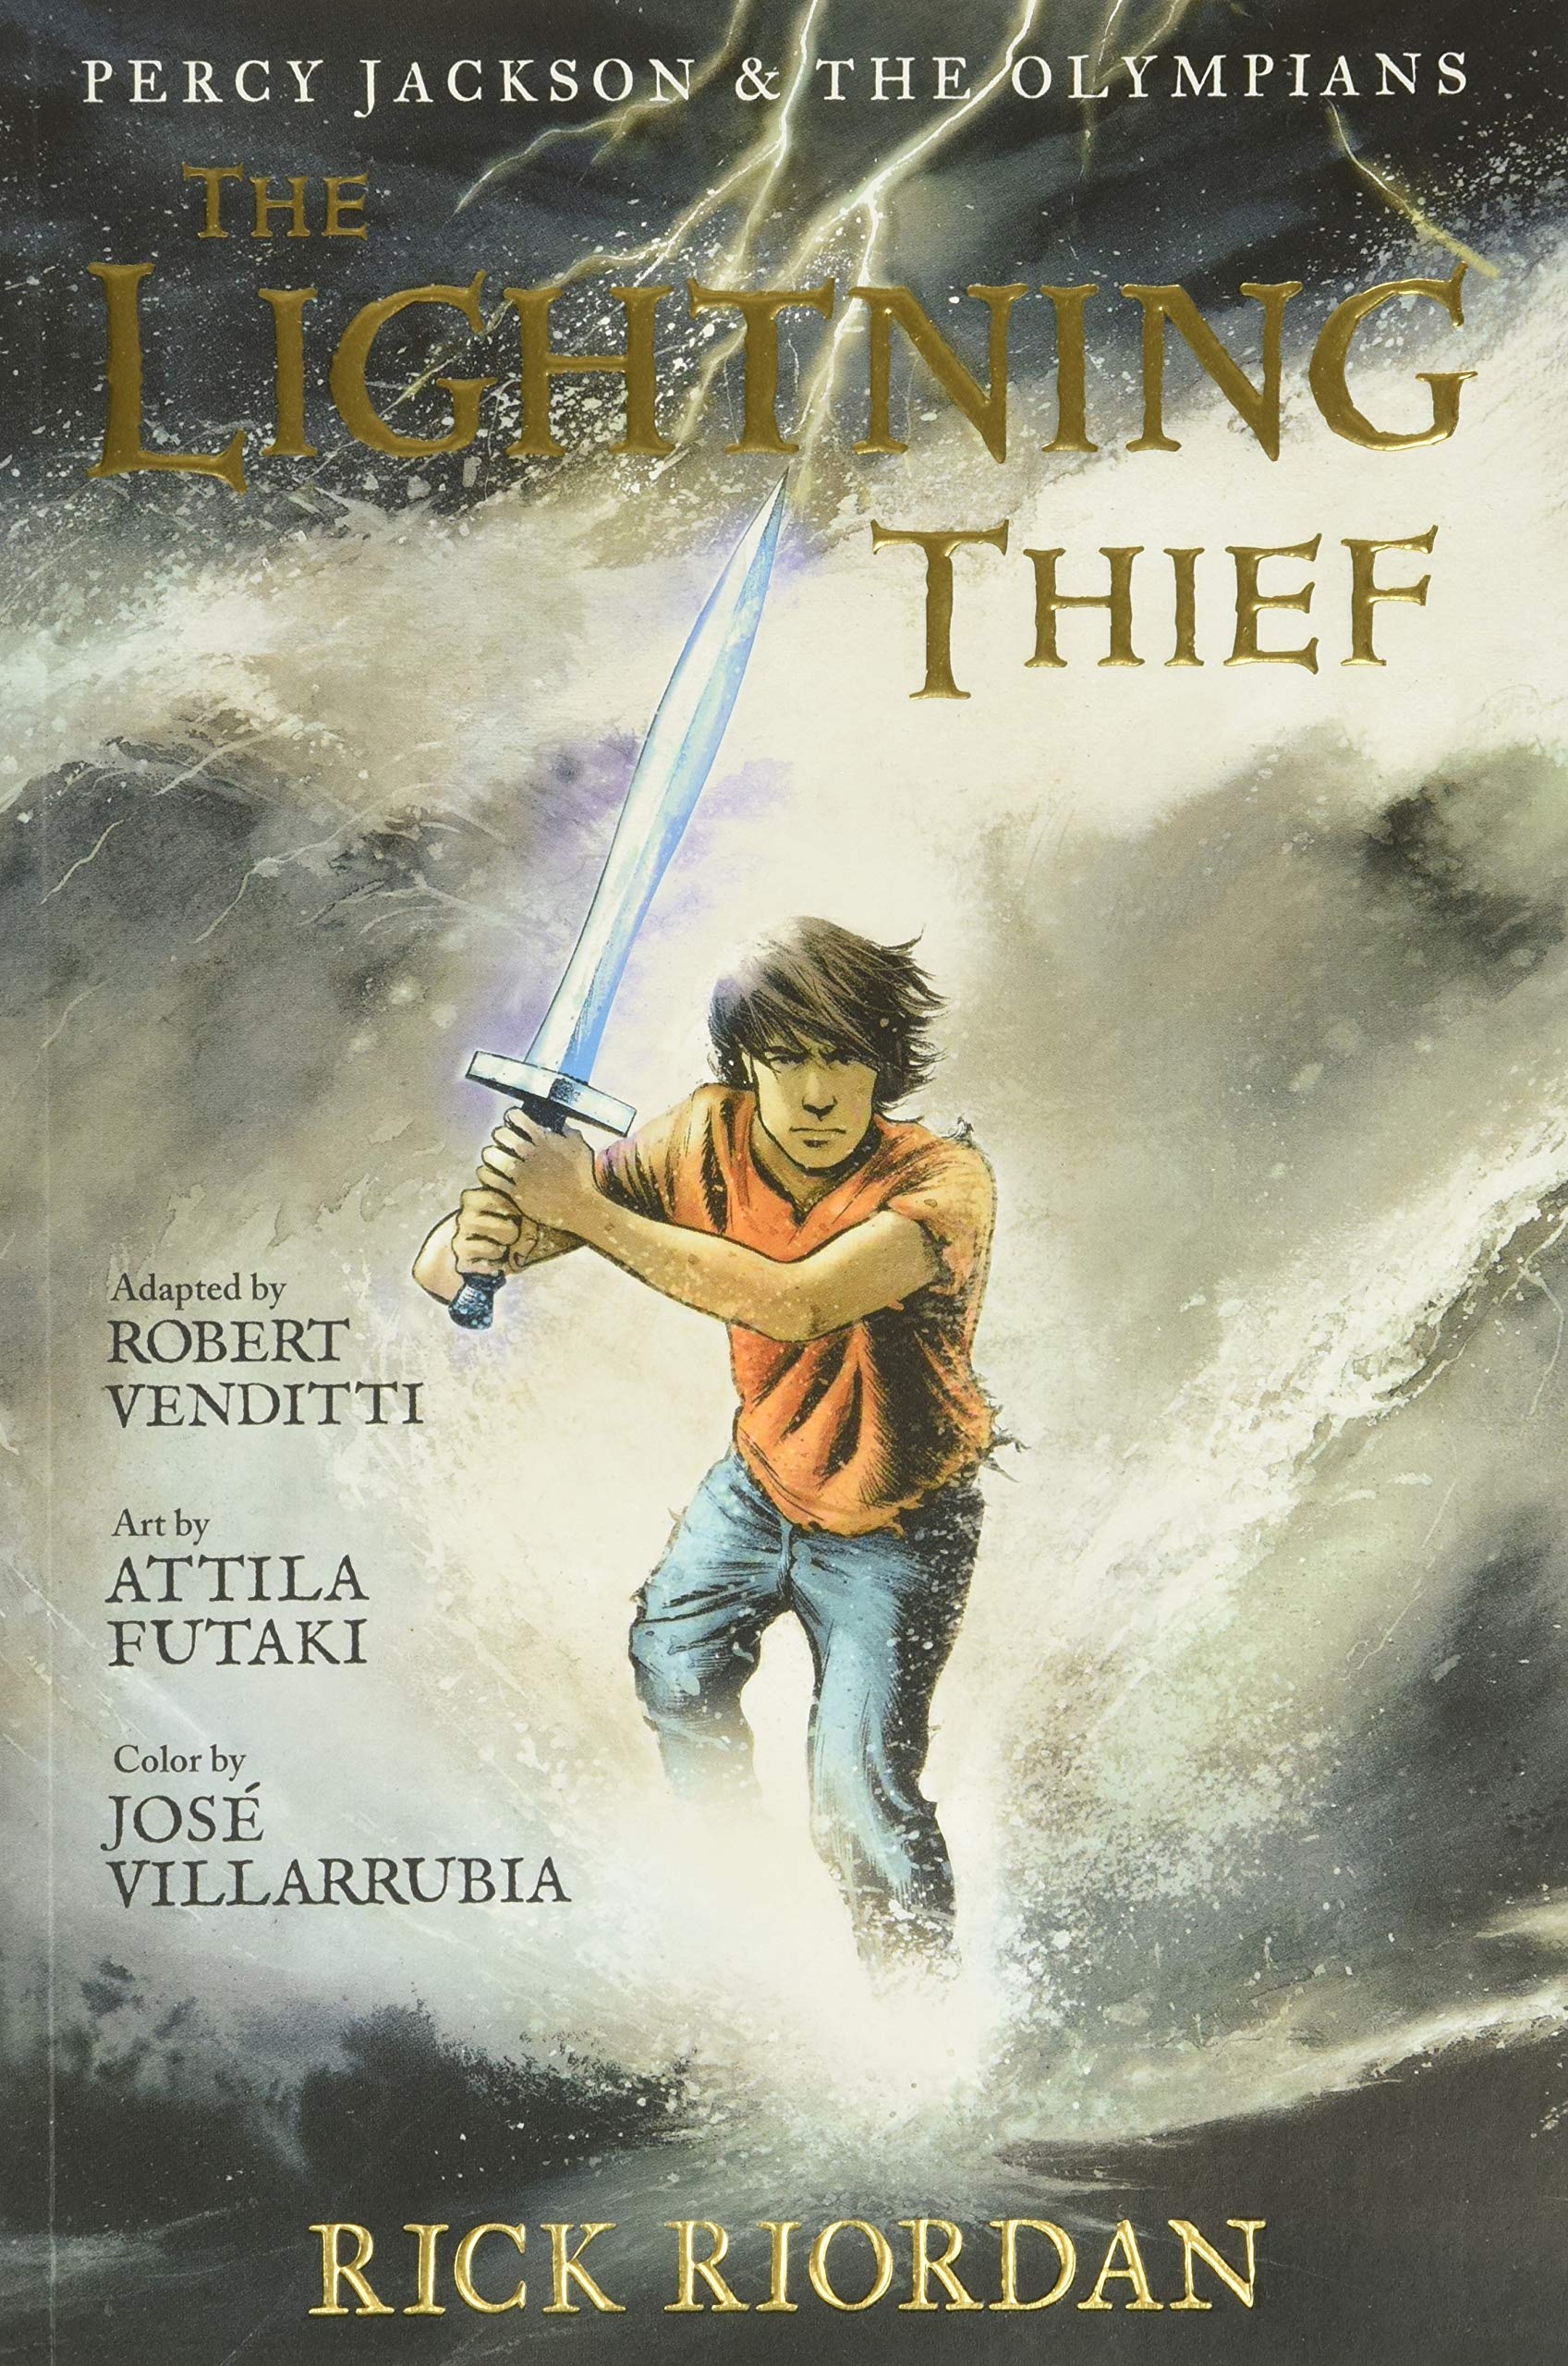 The Percy Jackson and the Olympians: Lightning Thief: The Graphic Novel (Paperback)